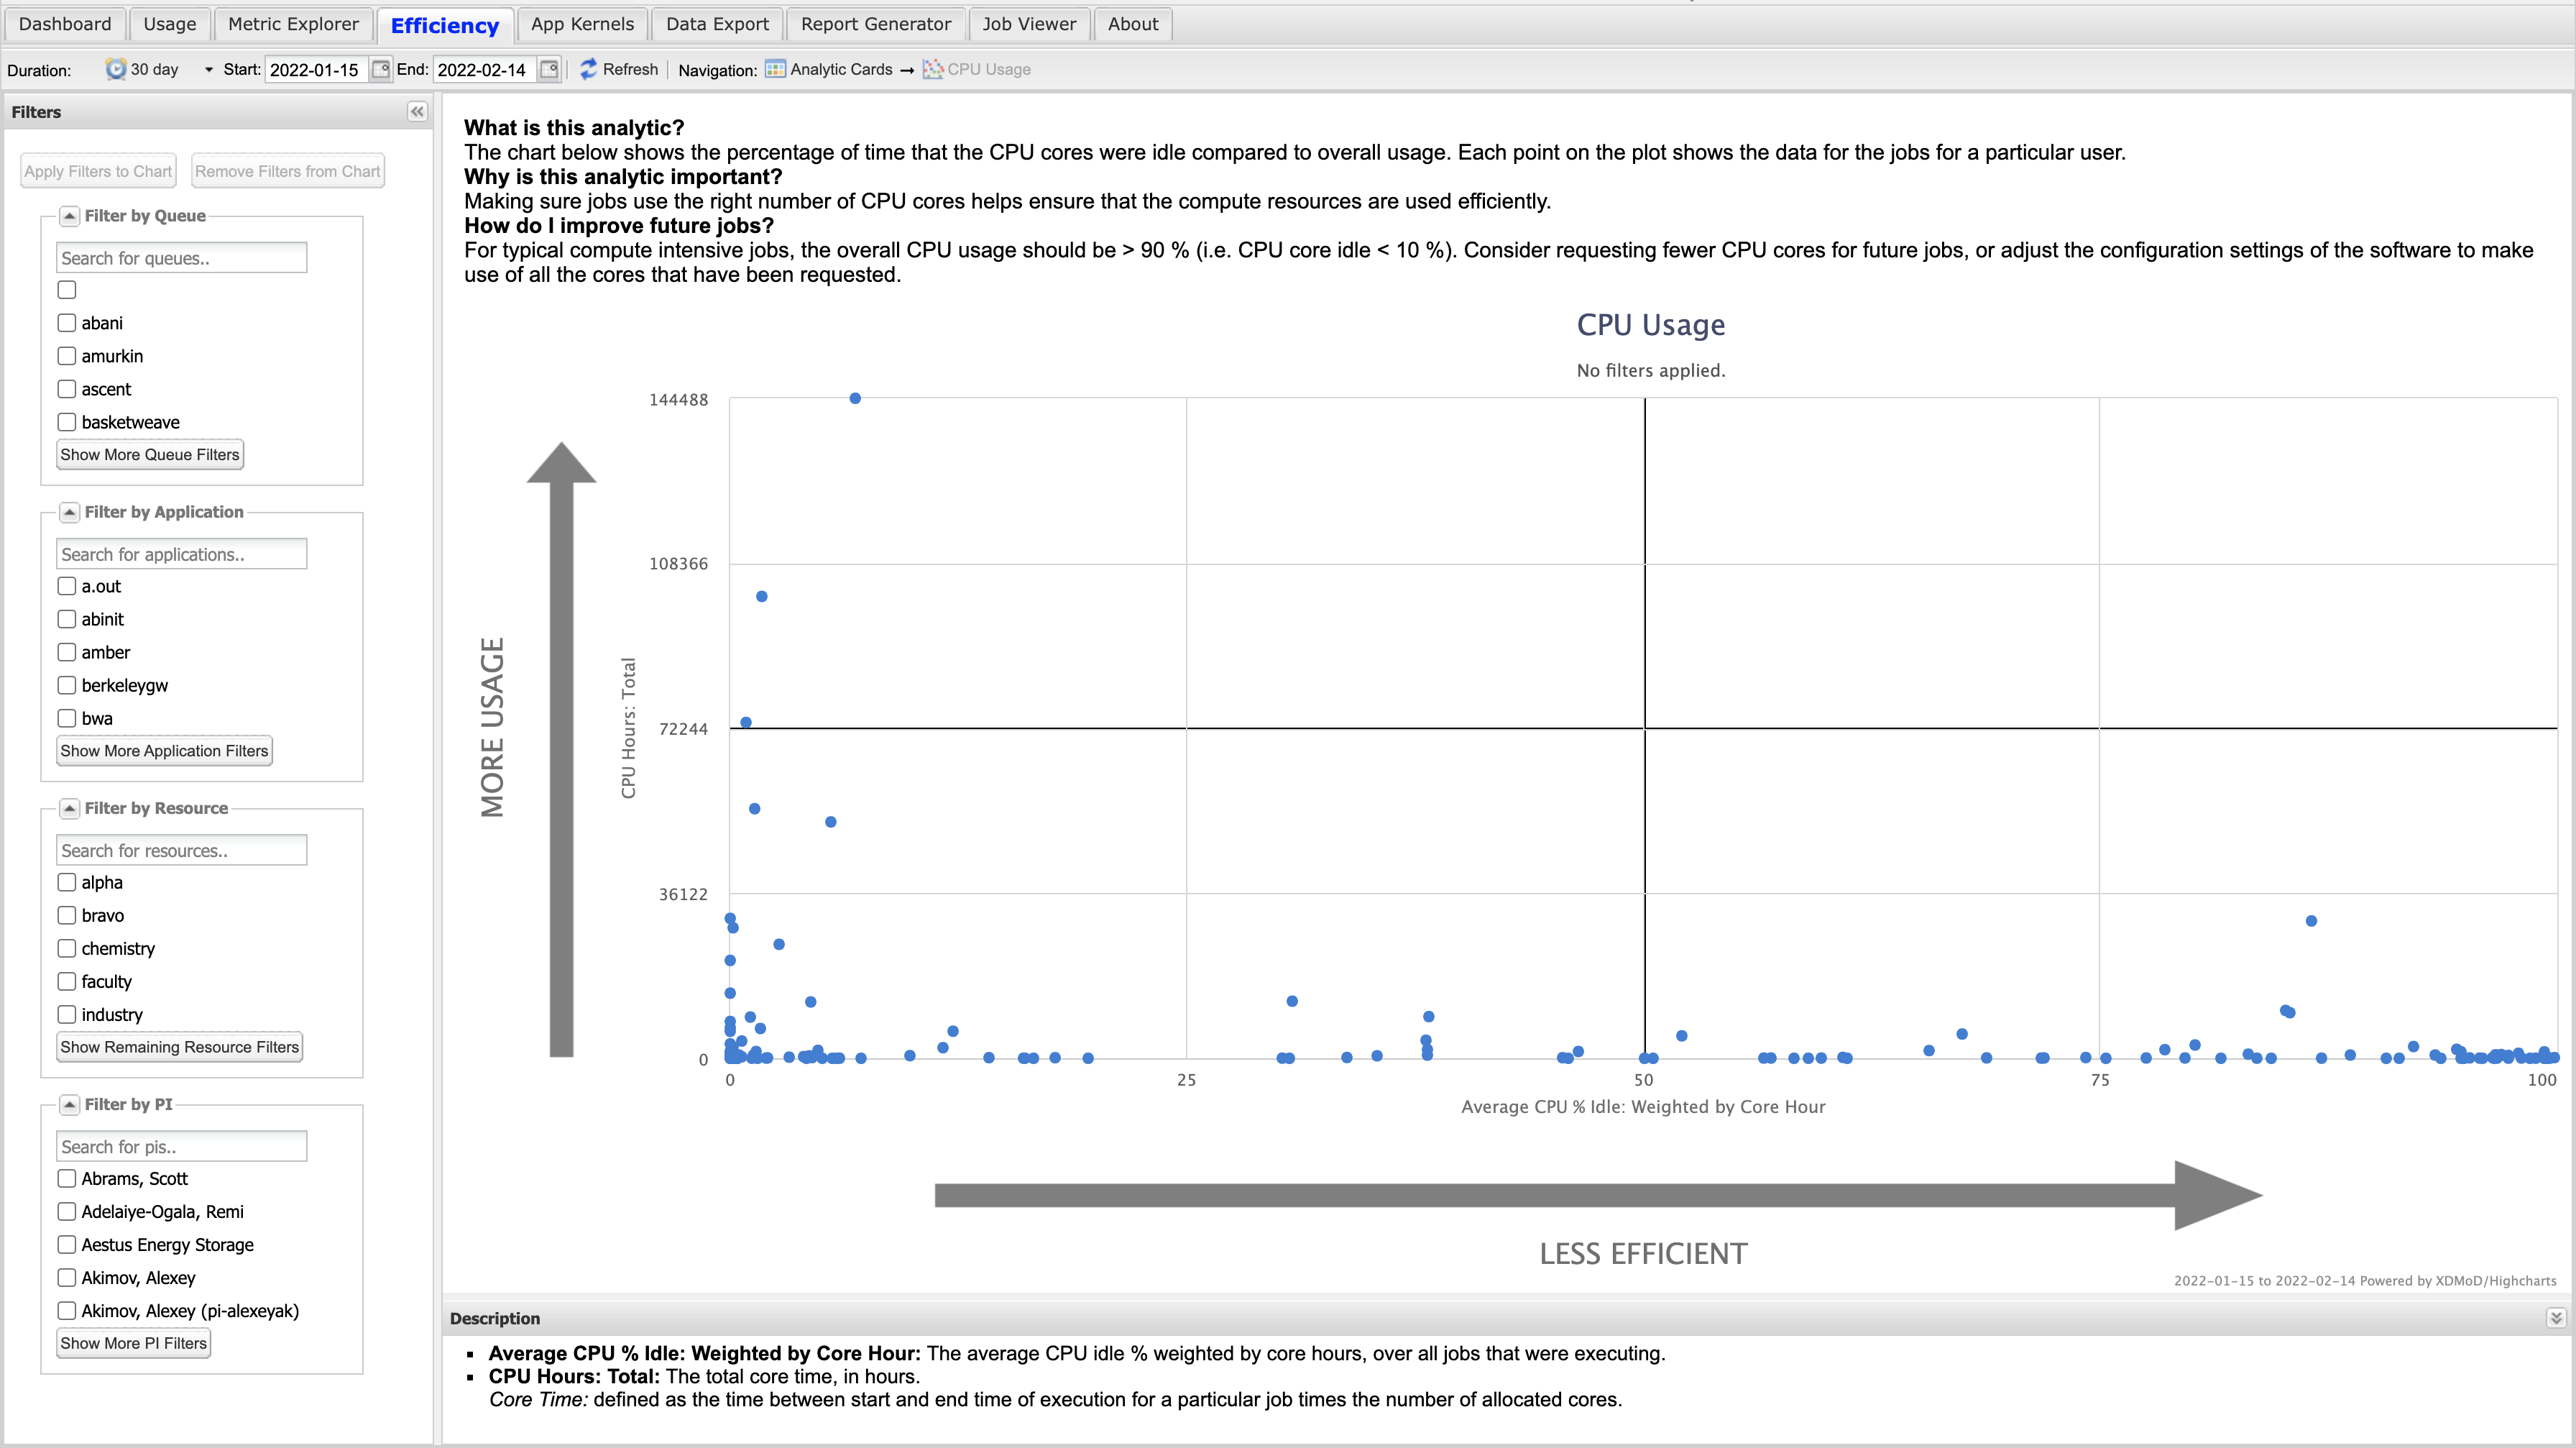 Screenshot of the scatter plot view for CPU Usage in the efficiency tab. Each analytic from the initial efficiency tab page can be viewed in more detail by clicking on the analytic card. This view shows the same scatter plot from the analytic card, but the scatter plot can be filtered or drilled down to learn more information about the users and their respective jobs represented by the scatter plot points. In addition to the scatter plot, there is a side bar that allows filtering and above the scatter plot is the help text explaining the analytic in more detail and giving more information on how to improve efficiency in regard to this analytic.